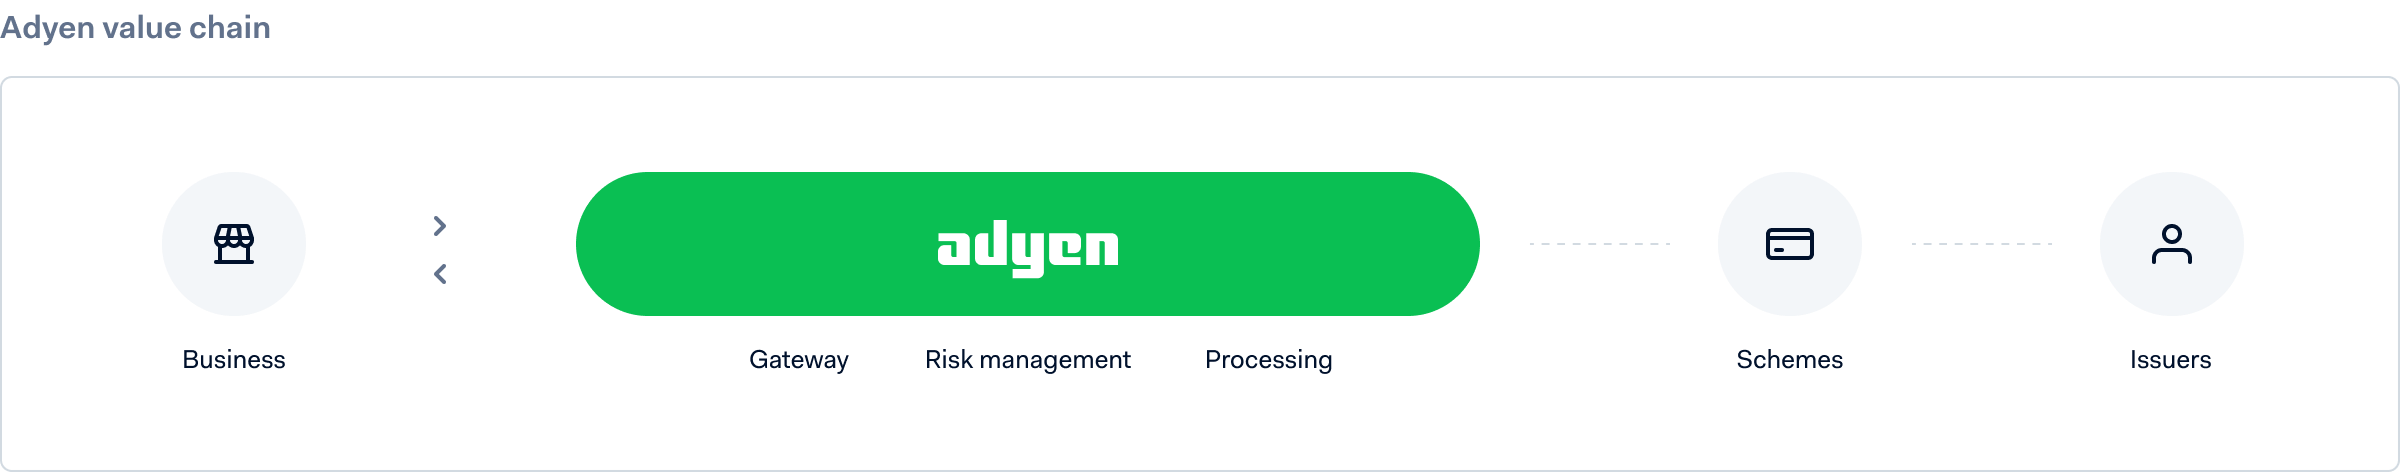 Where Adyen's payment platform sits in the payment flow